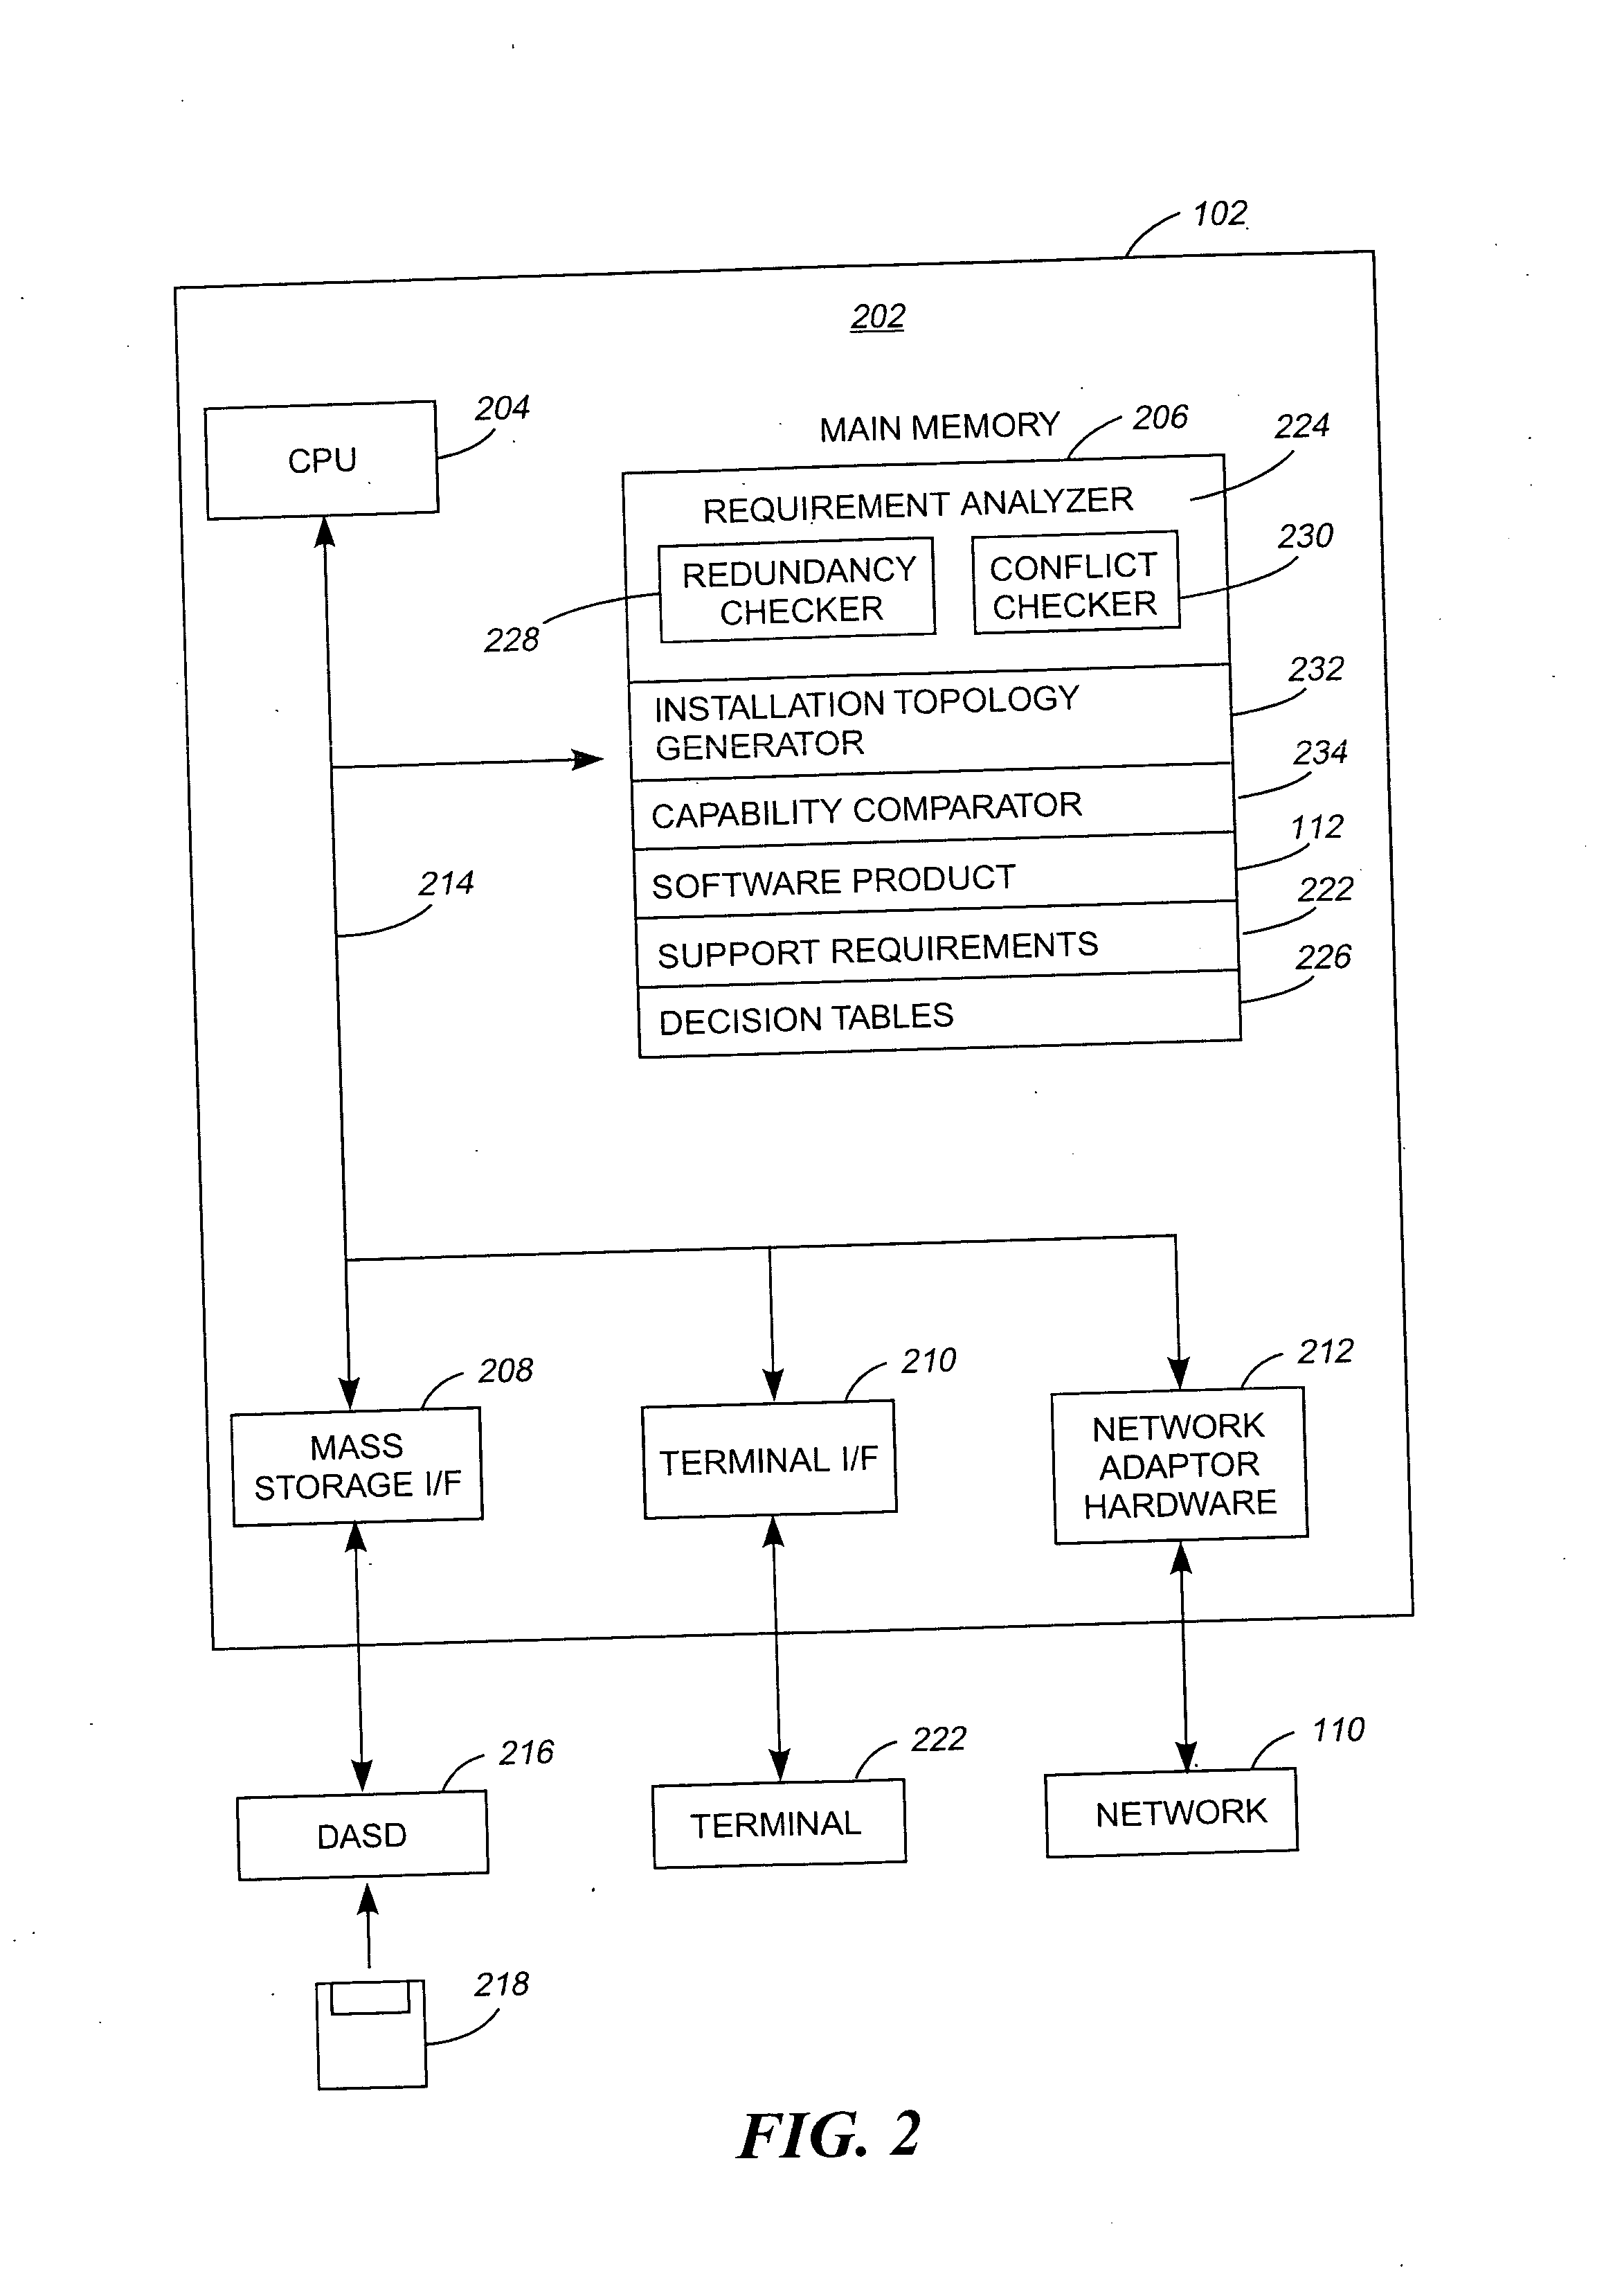 System and method for deploying software based on matching provisioning requirements and capabilities